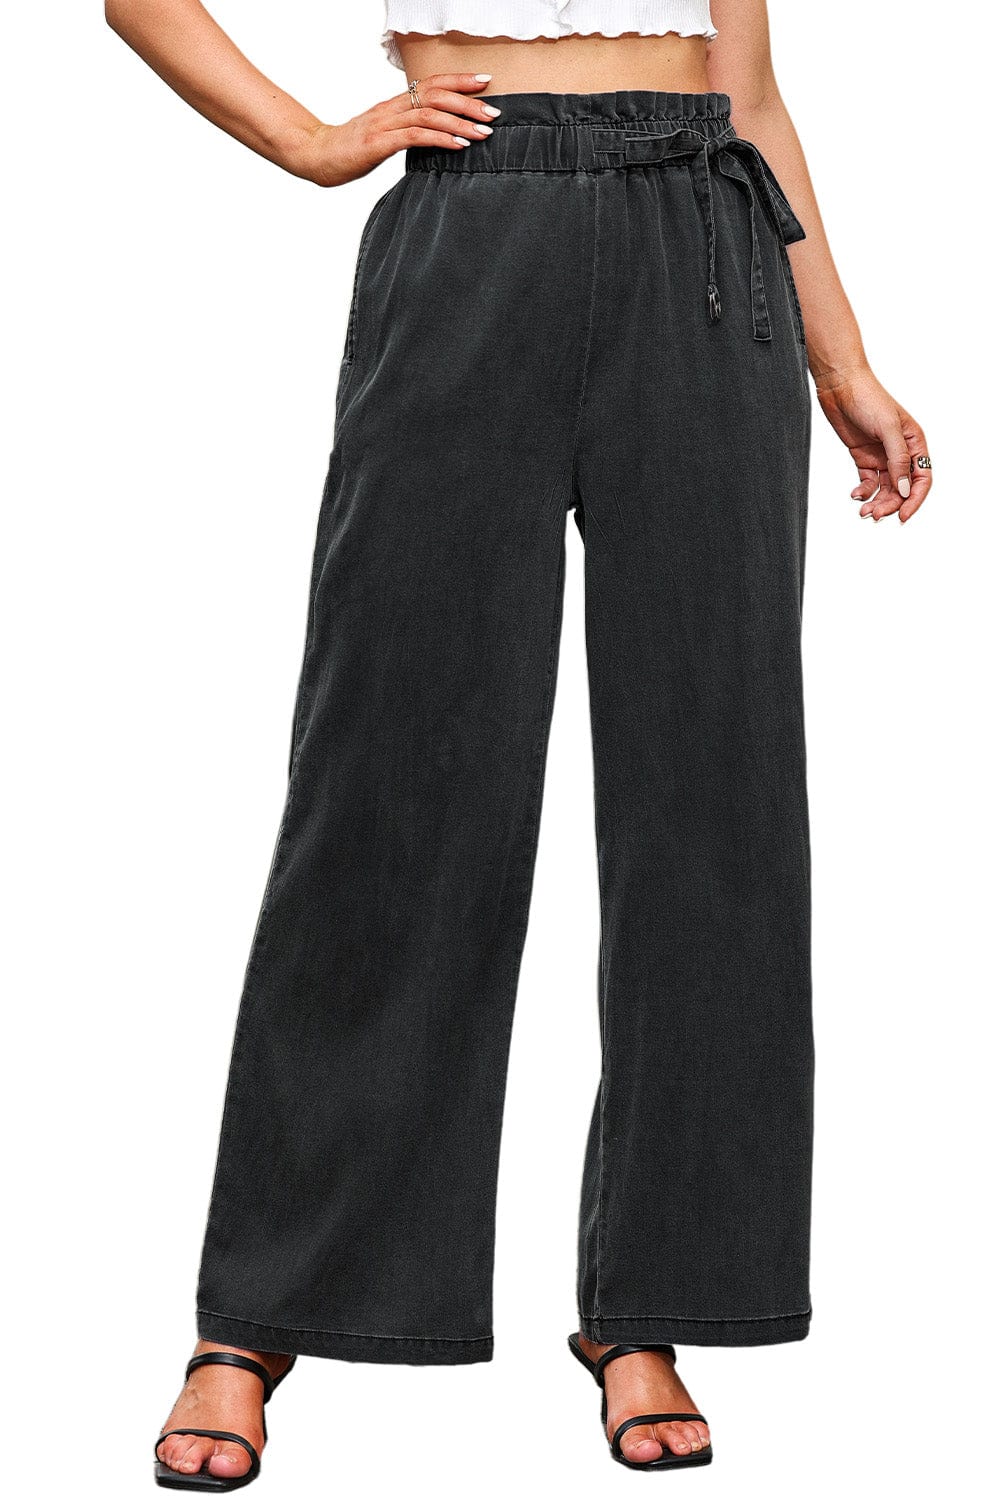 The802Gypsy  Bottoms Black High Waist Pocketed Wide Leg Tencel Jeans